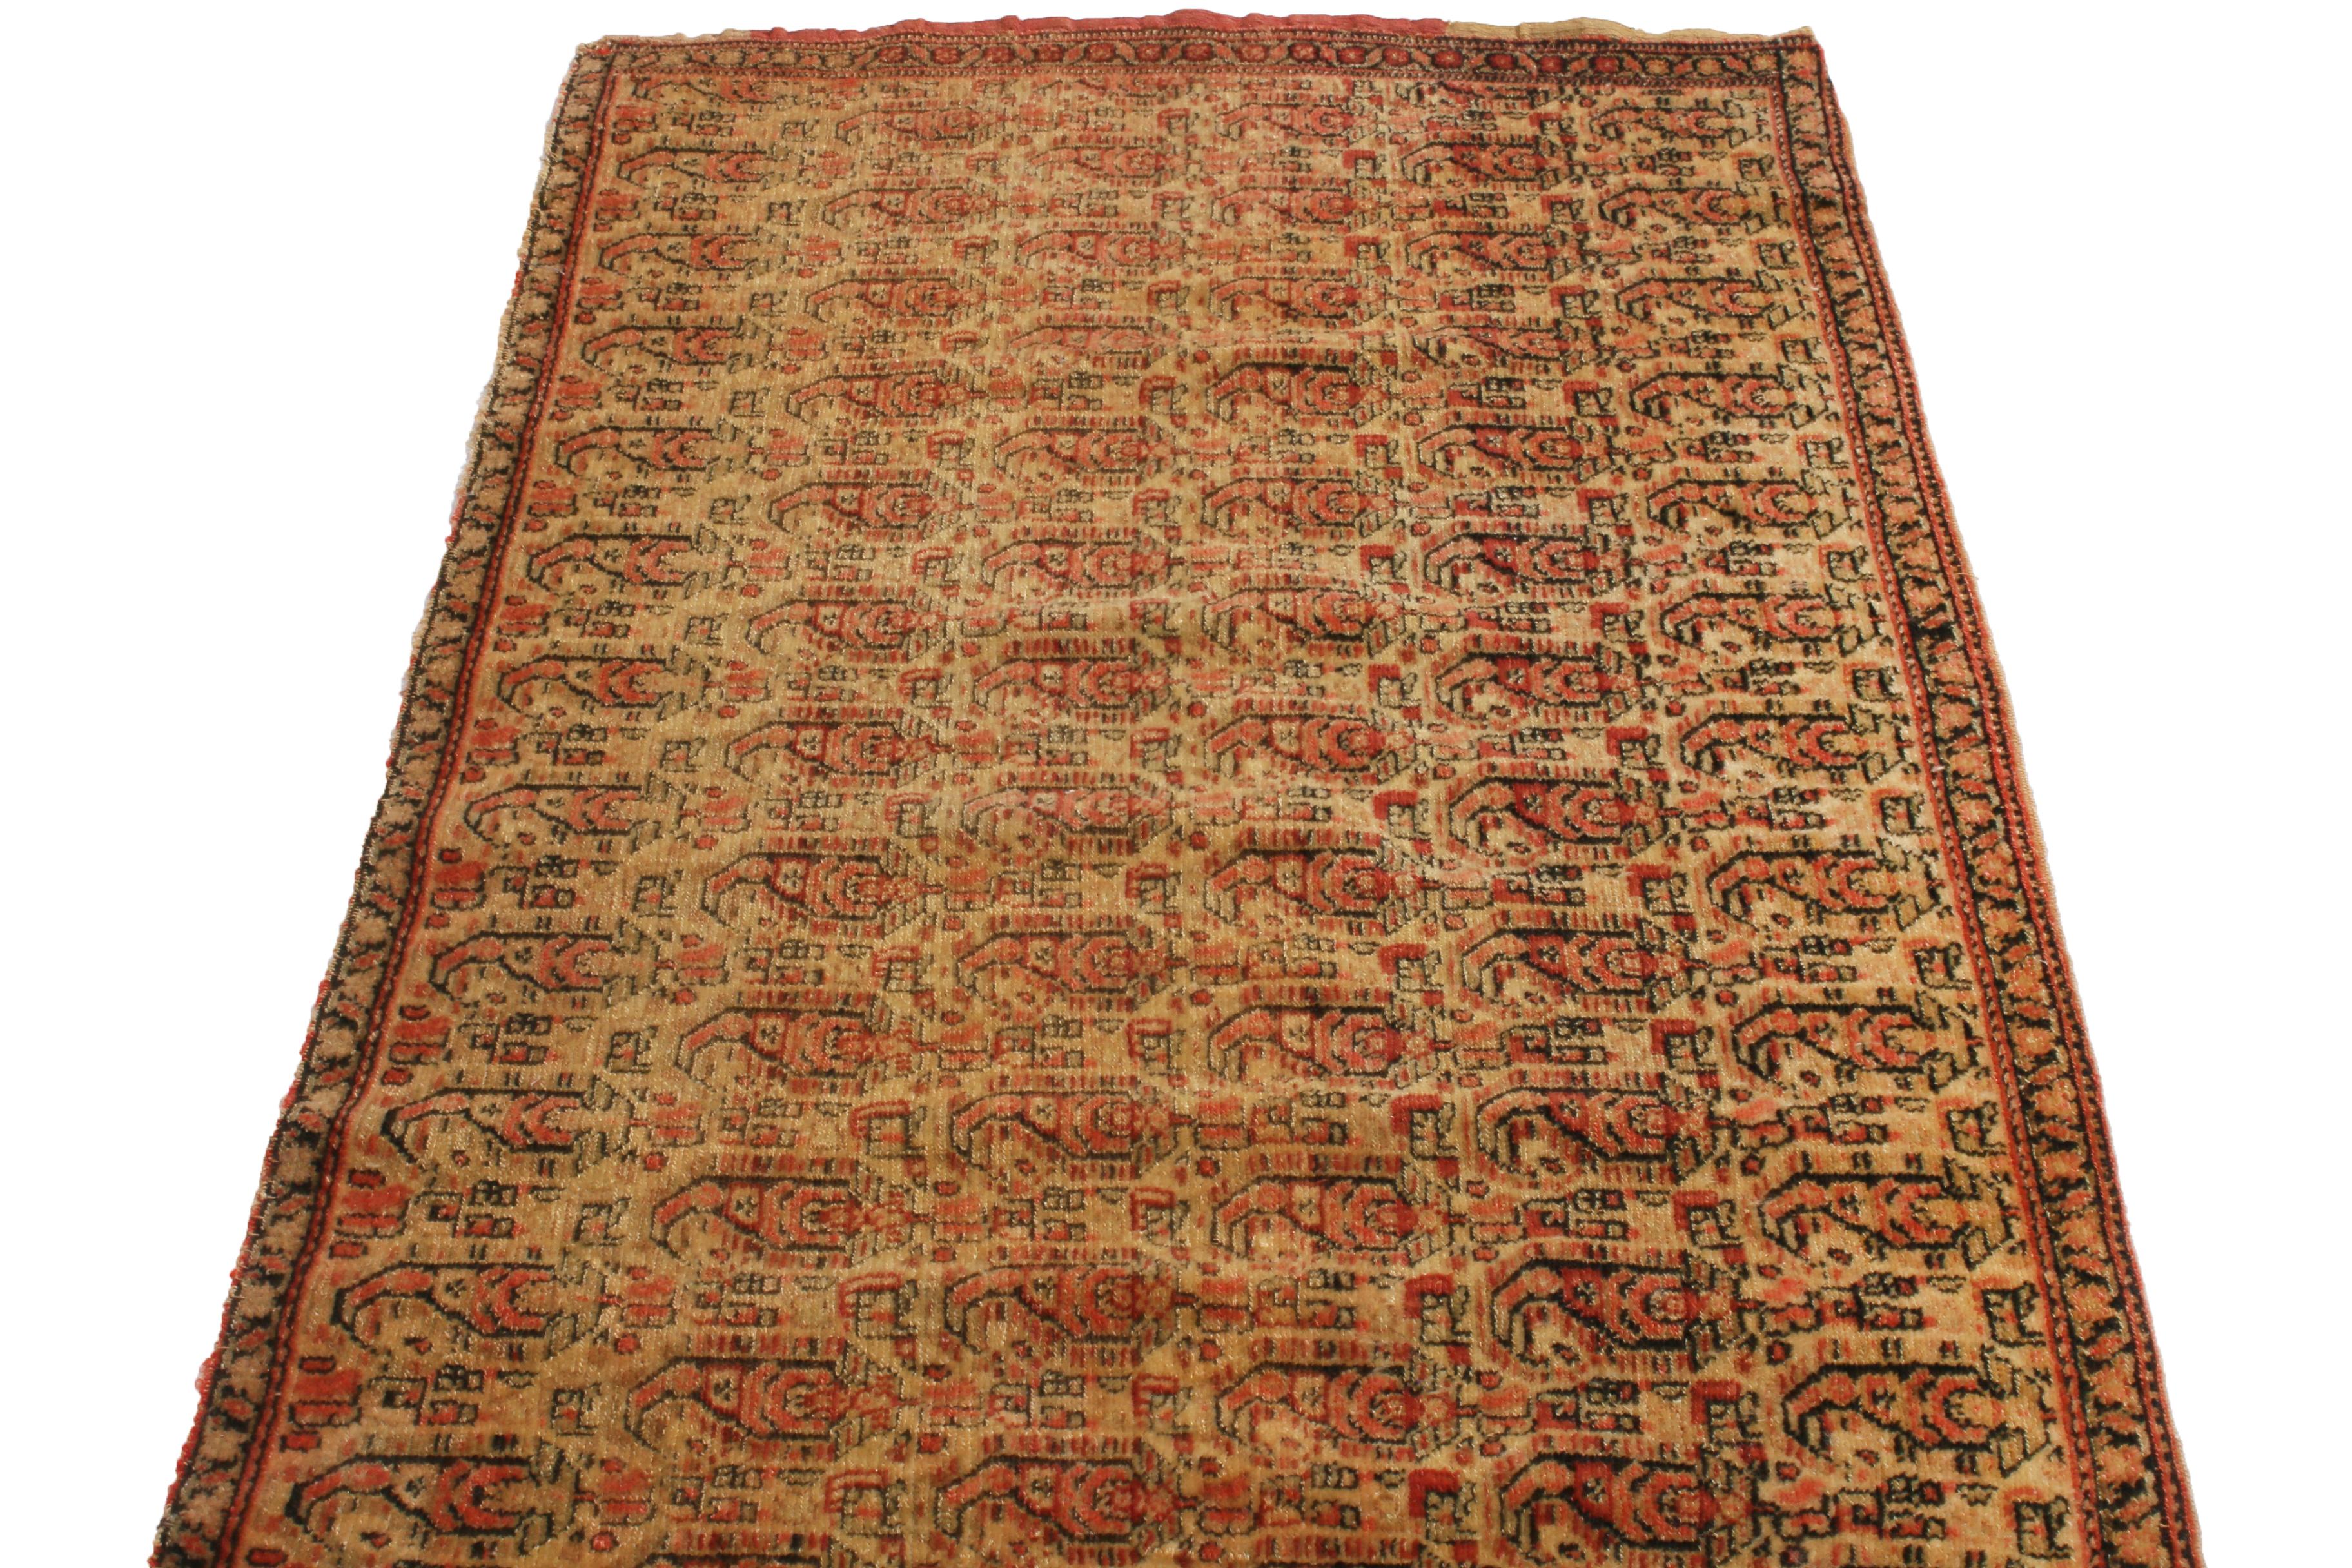 Originating from Persia between 1880-1900, this antique Senneh Persian rug is home to an inviting, repetition of traditional Boteh paisley patterns, complemented by lively carnation pink and red colorways against the luminous beige background.